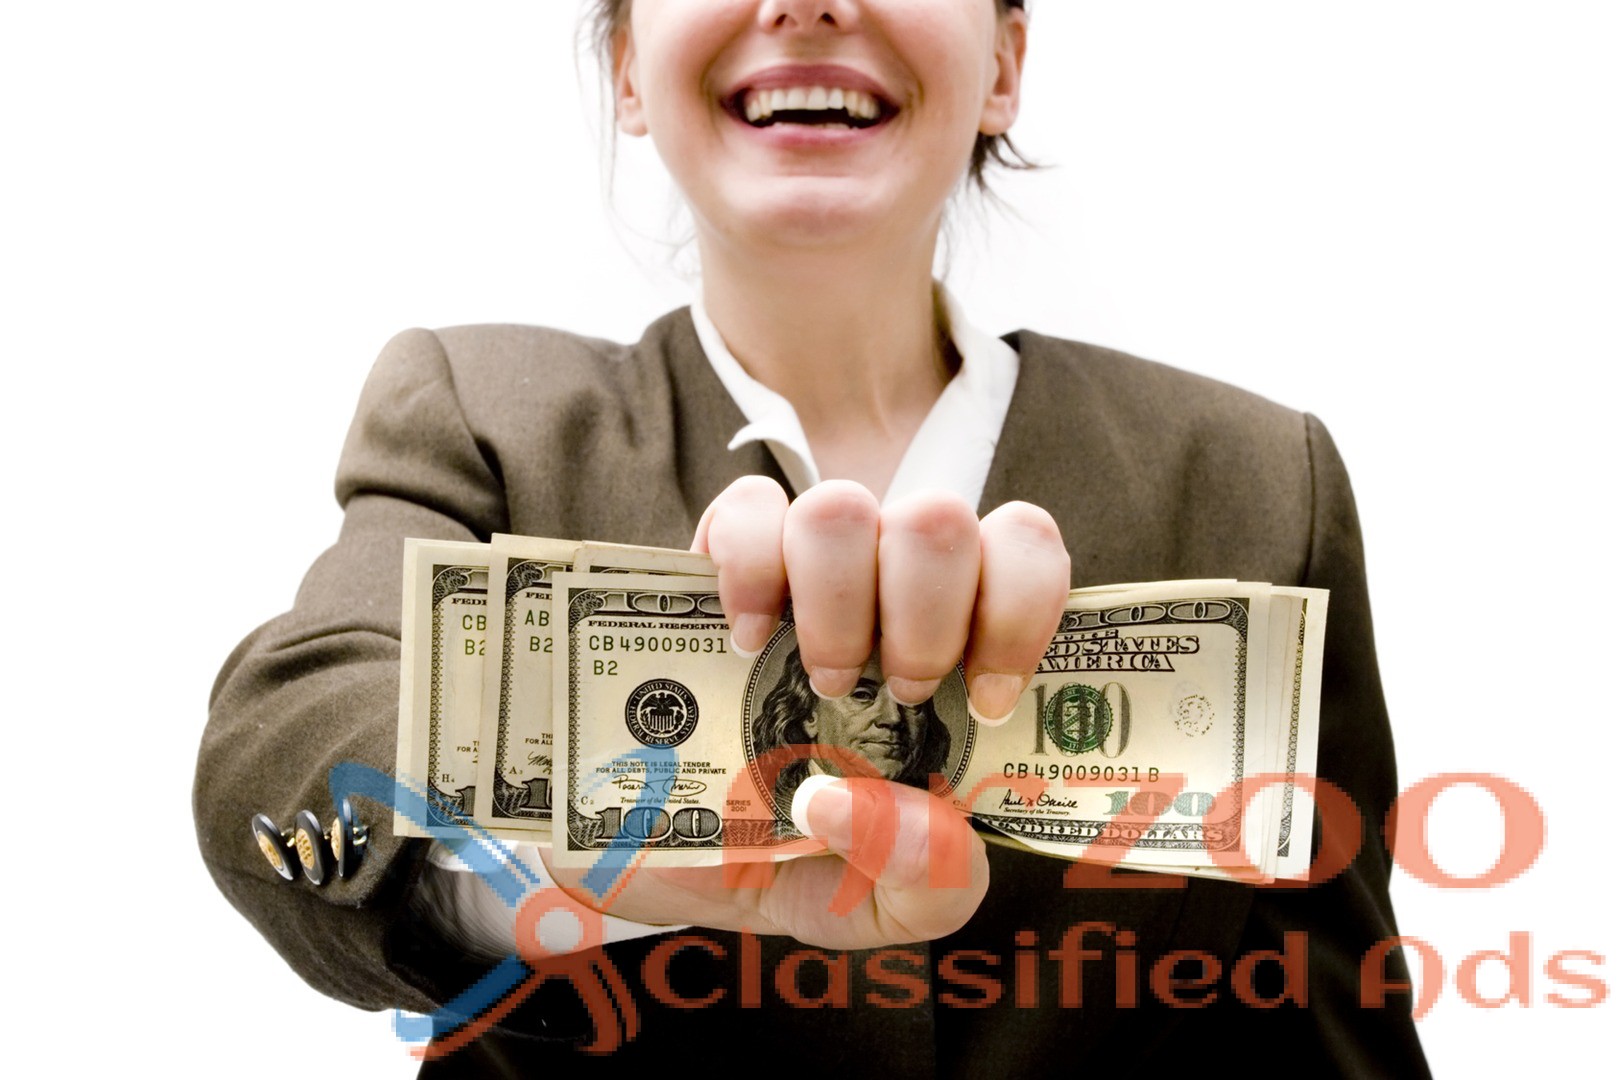 LOANS FOR 3 PERSONAL LOAN & BUSINESS LOAN OFFER Arzoo Classified Ads